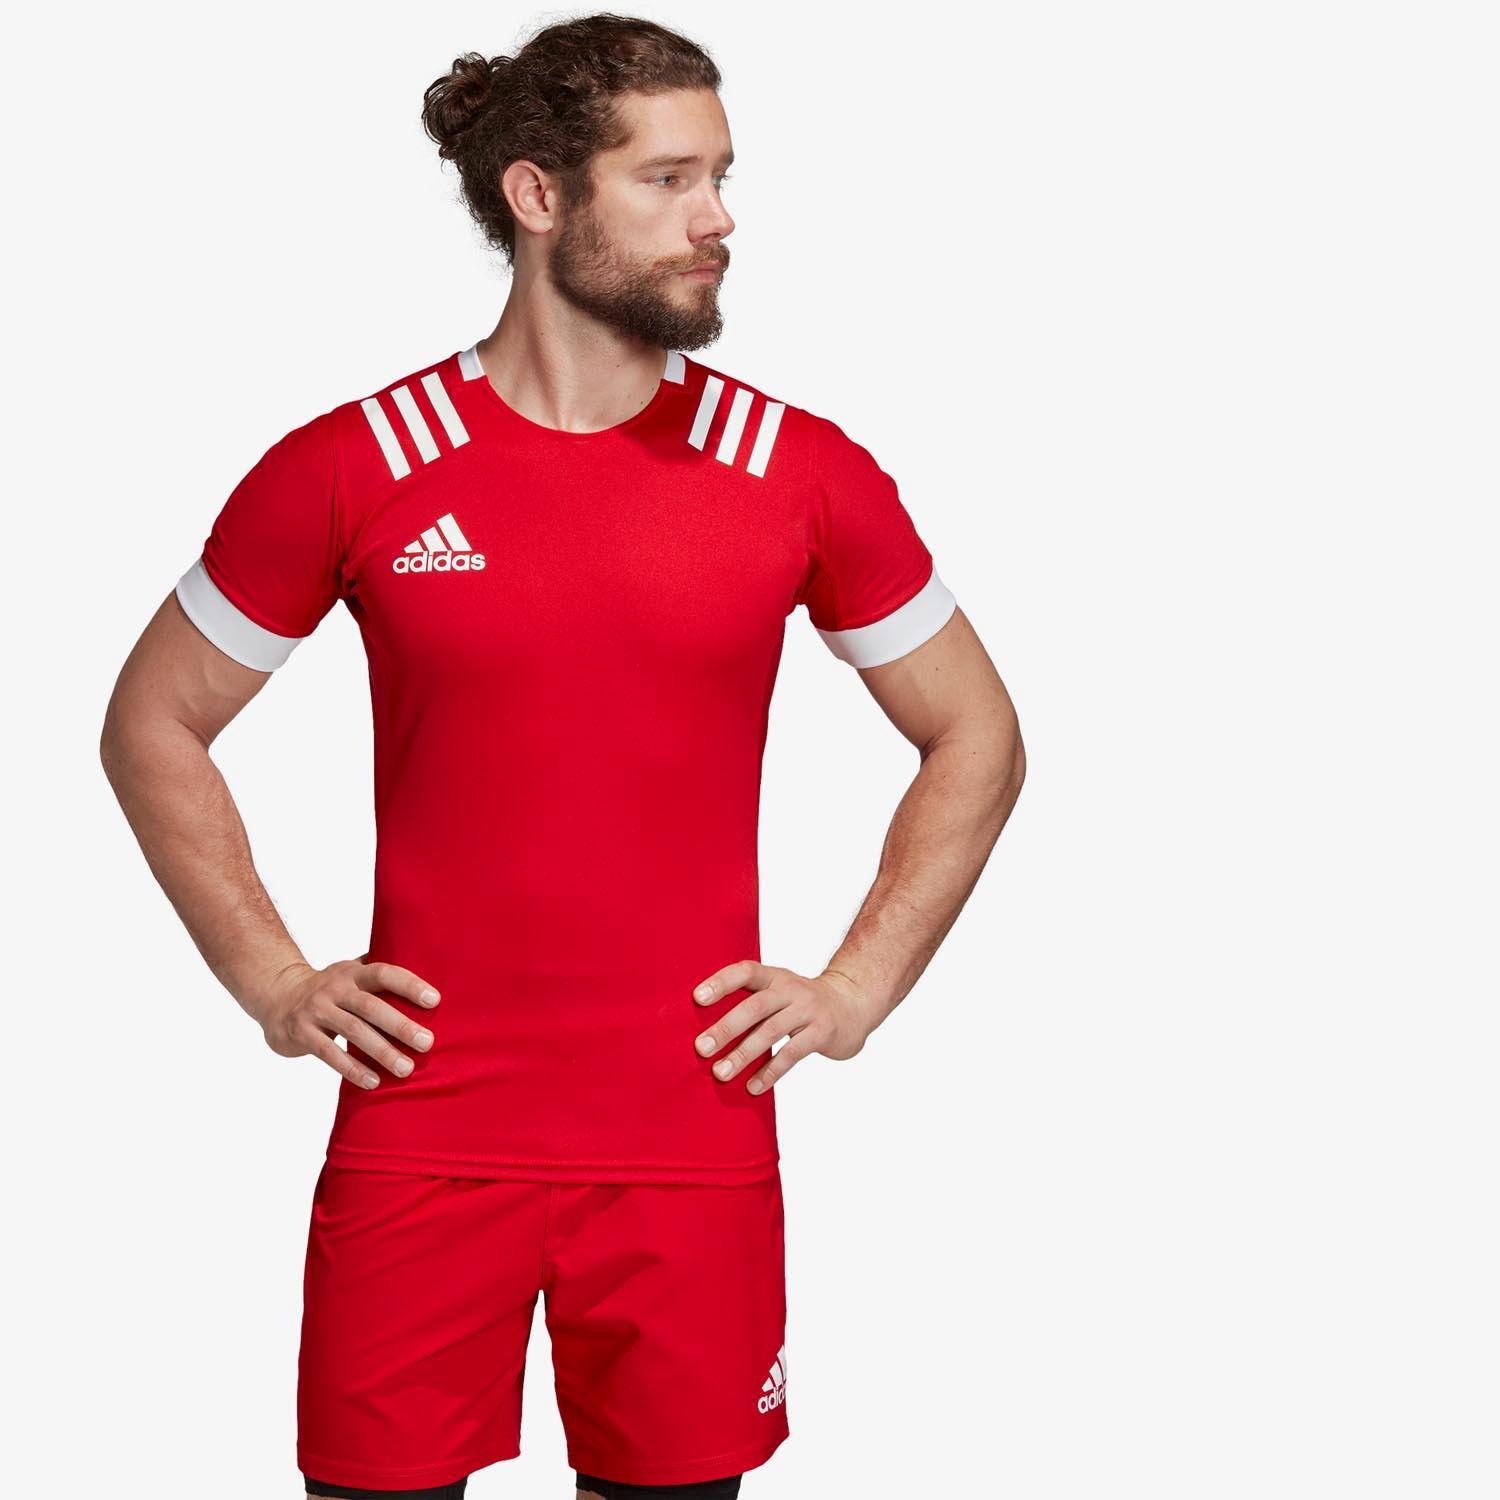 adidas 3 Stripes - Rouge - Maillot Rugby Homme sports taille S